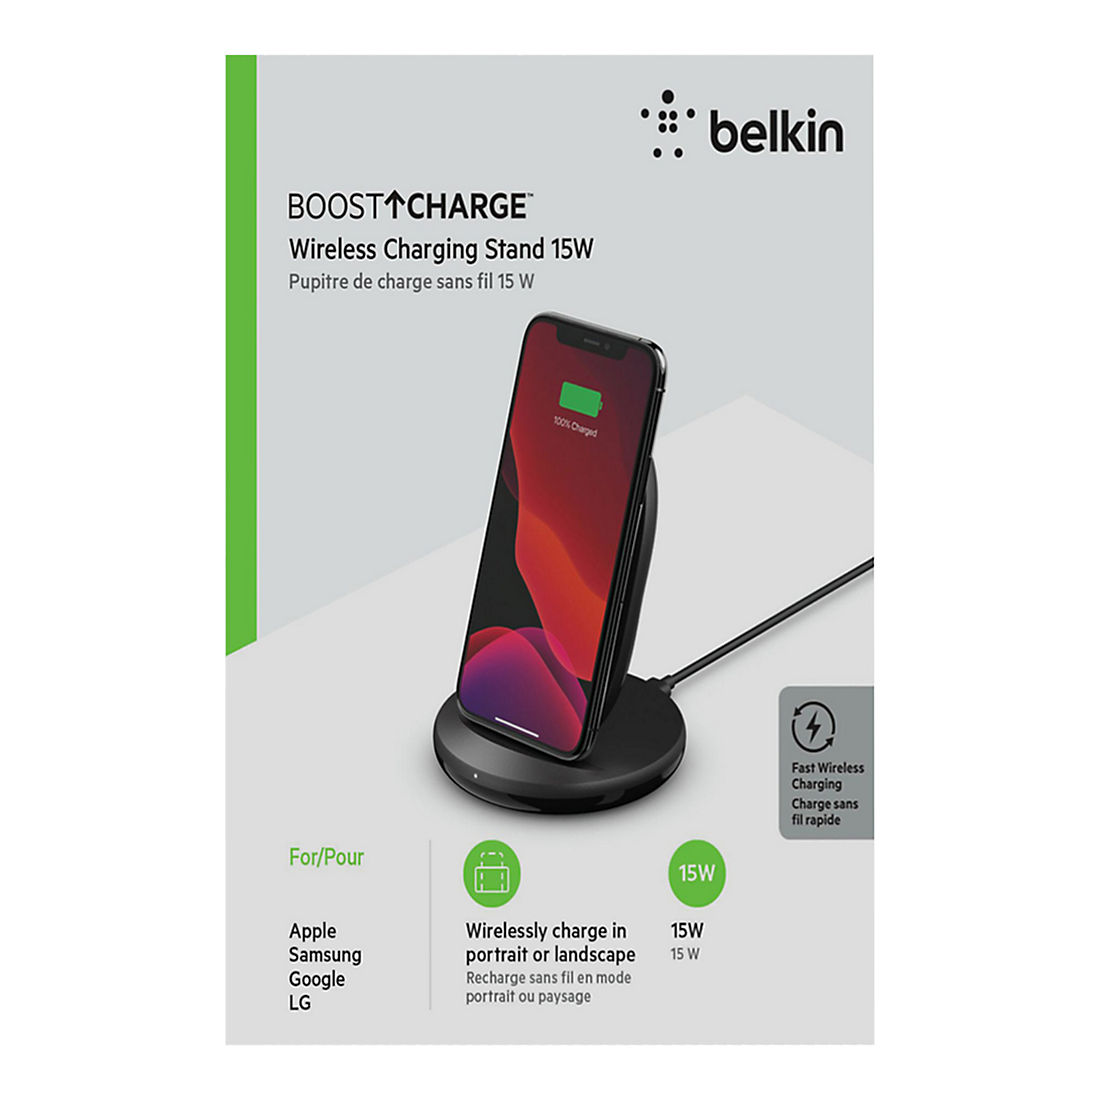 Belkin Boost Charge 15W Wireless Charging Stand and 24W Qc 3.0 Wall Charger